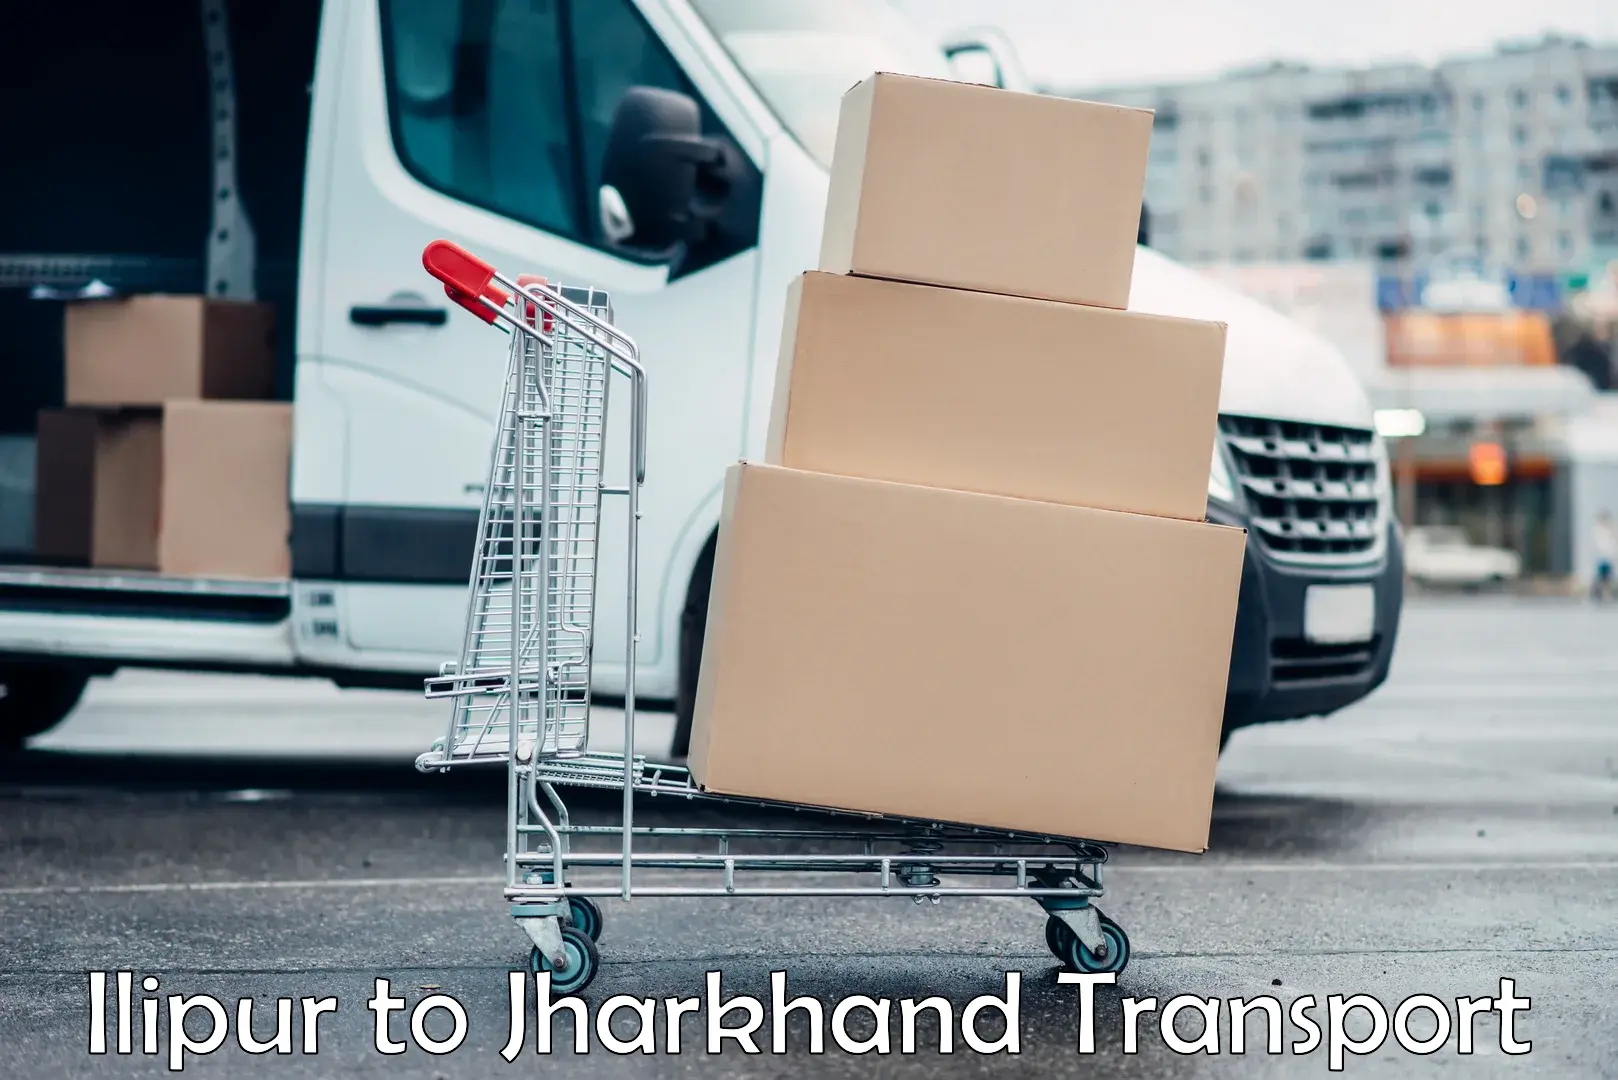 Shipping services Ilipur to Jharkhand